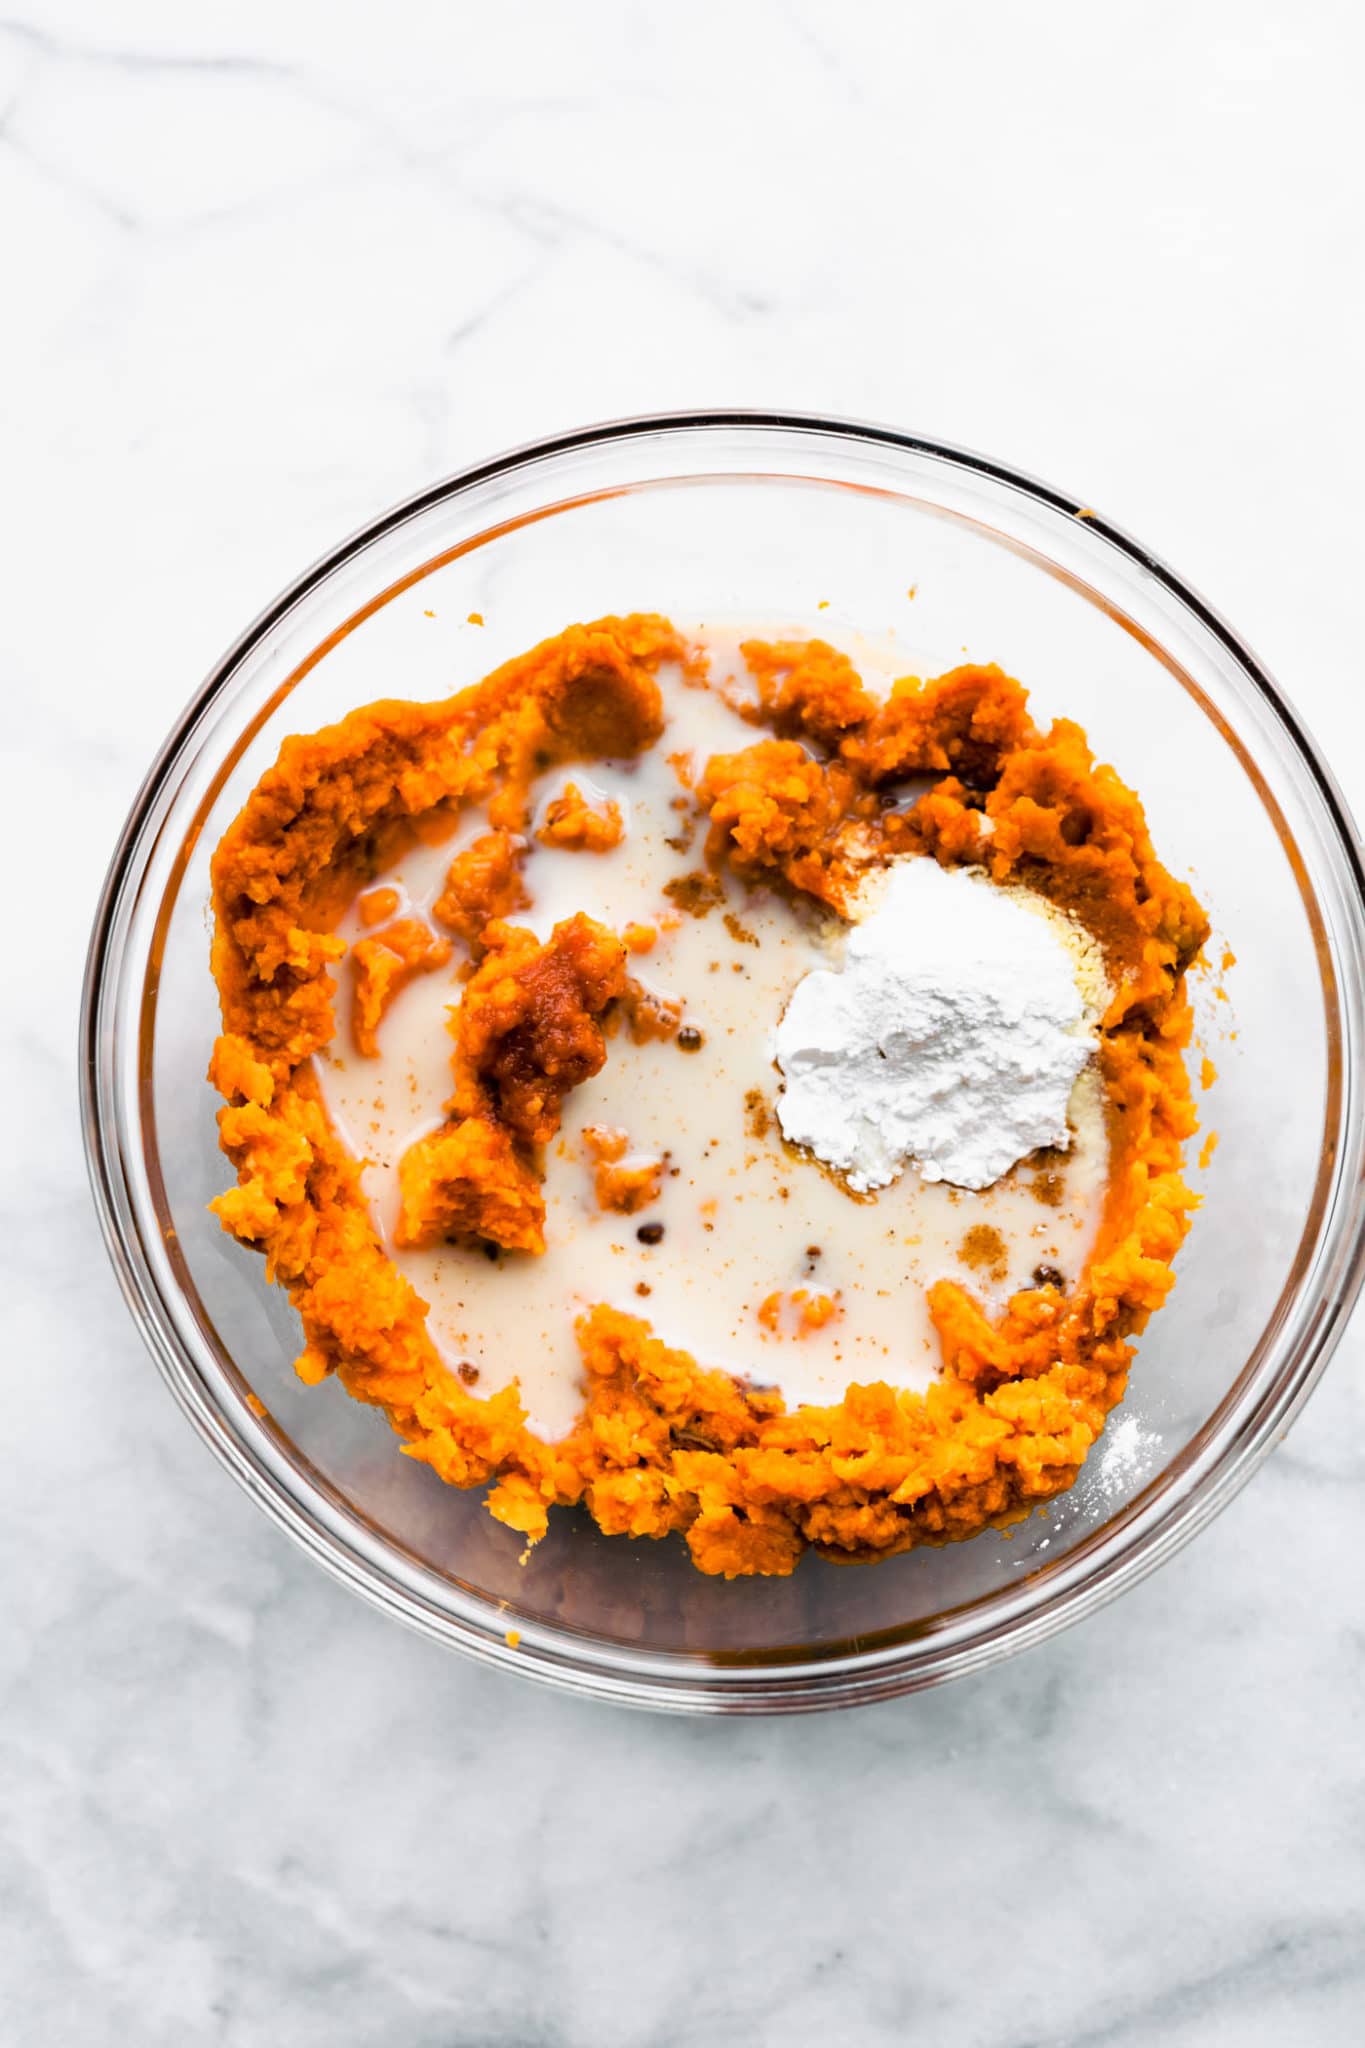 Pureed sweet potatoes in a blender with non-dairy milk and other ingredients for a vegan sweet potato casserole